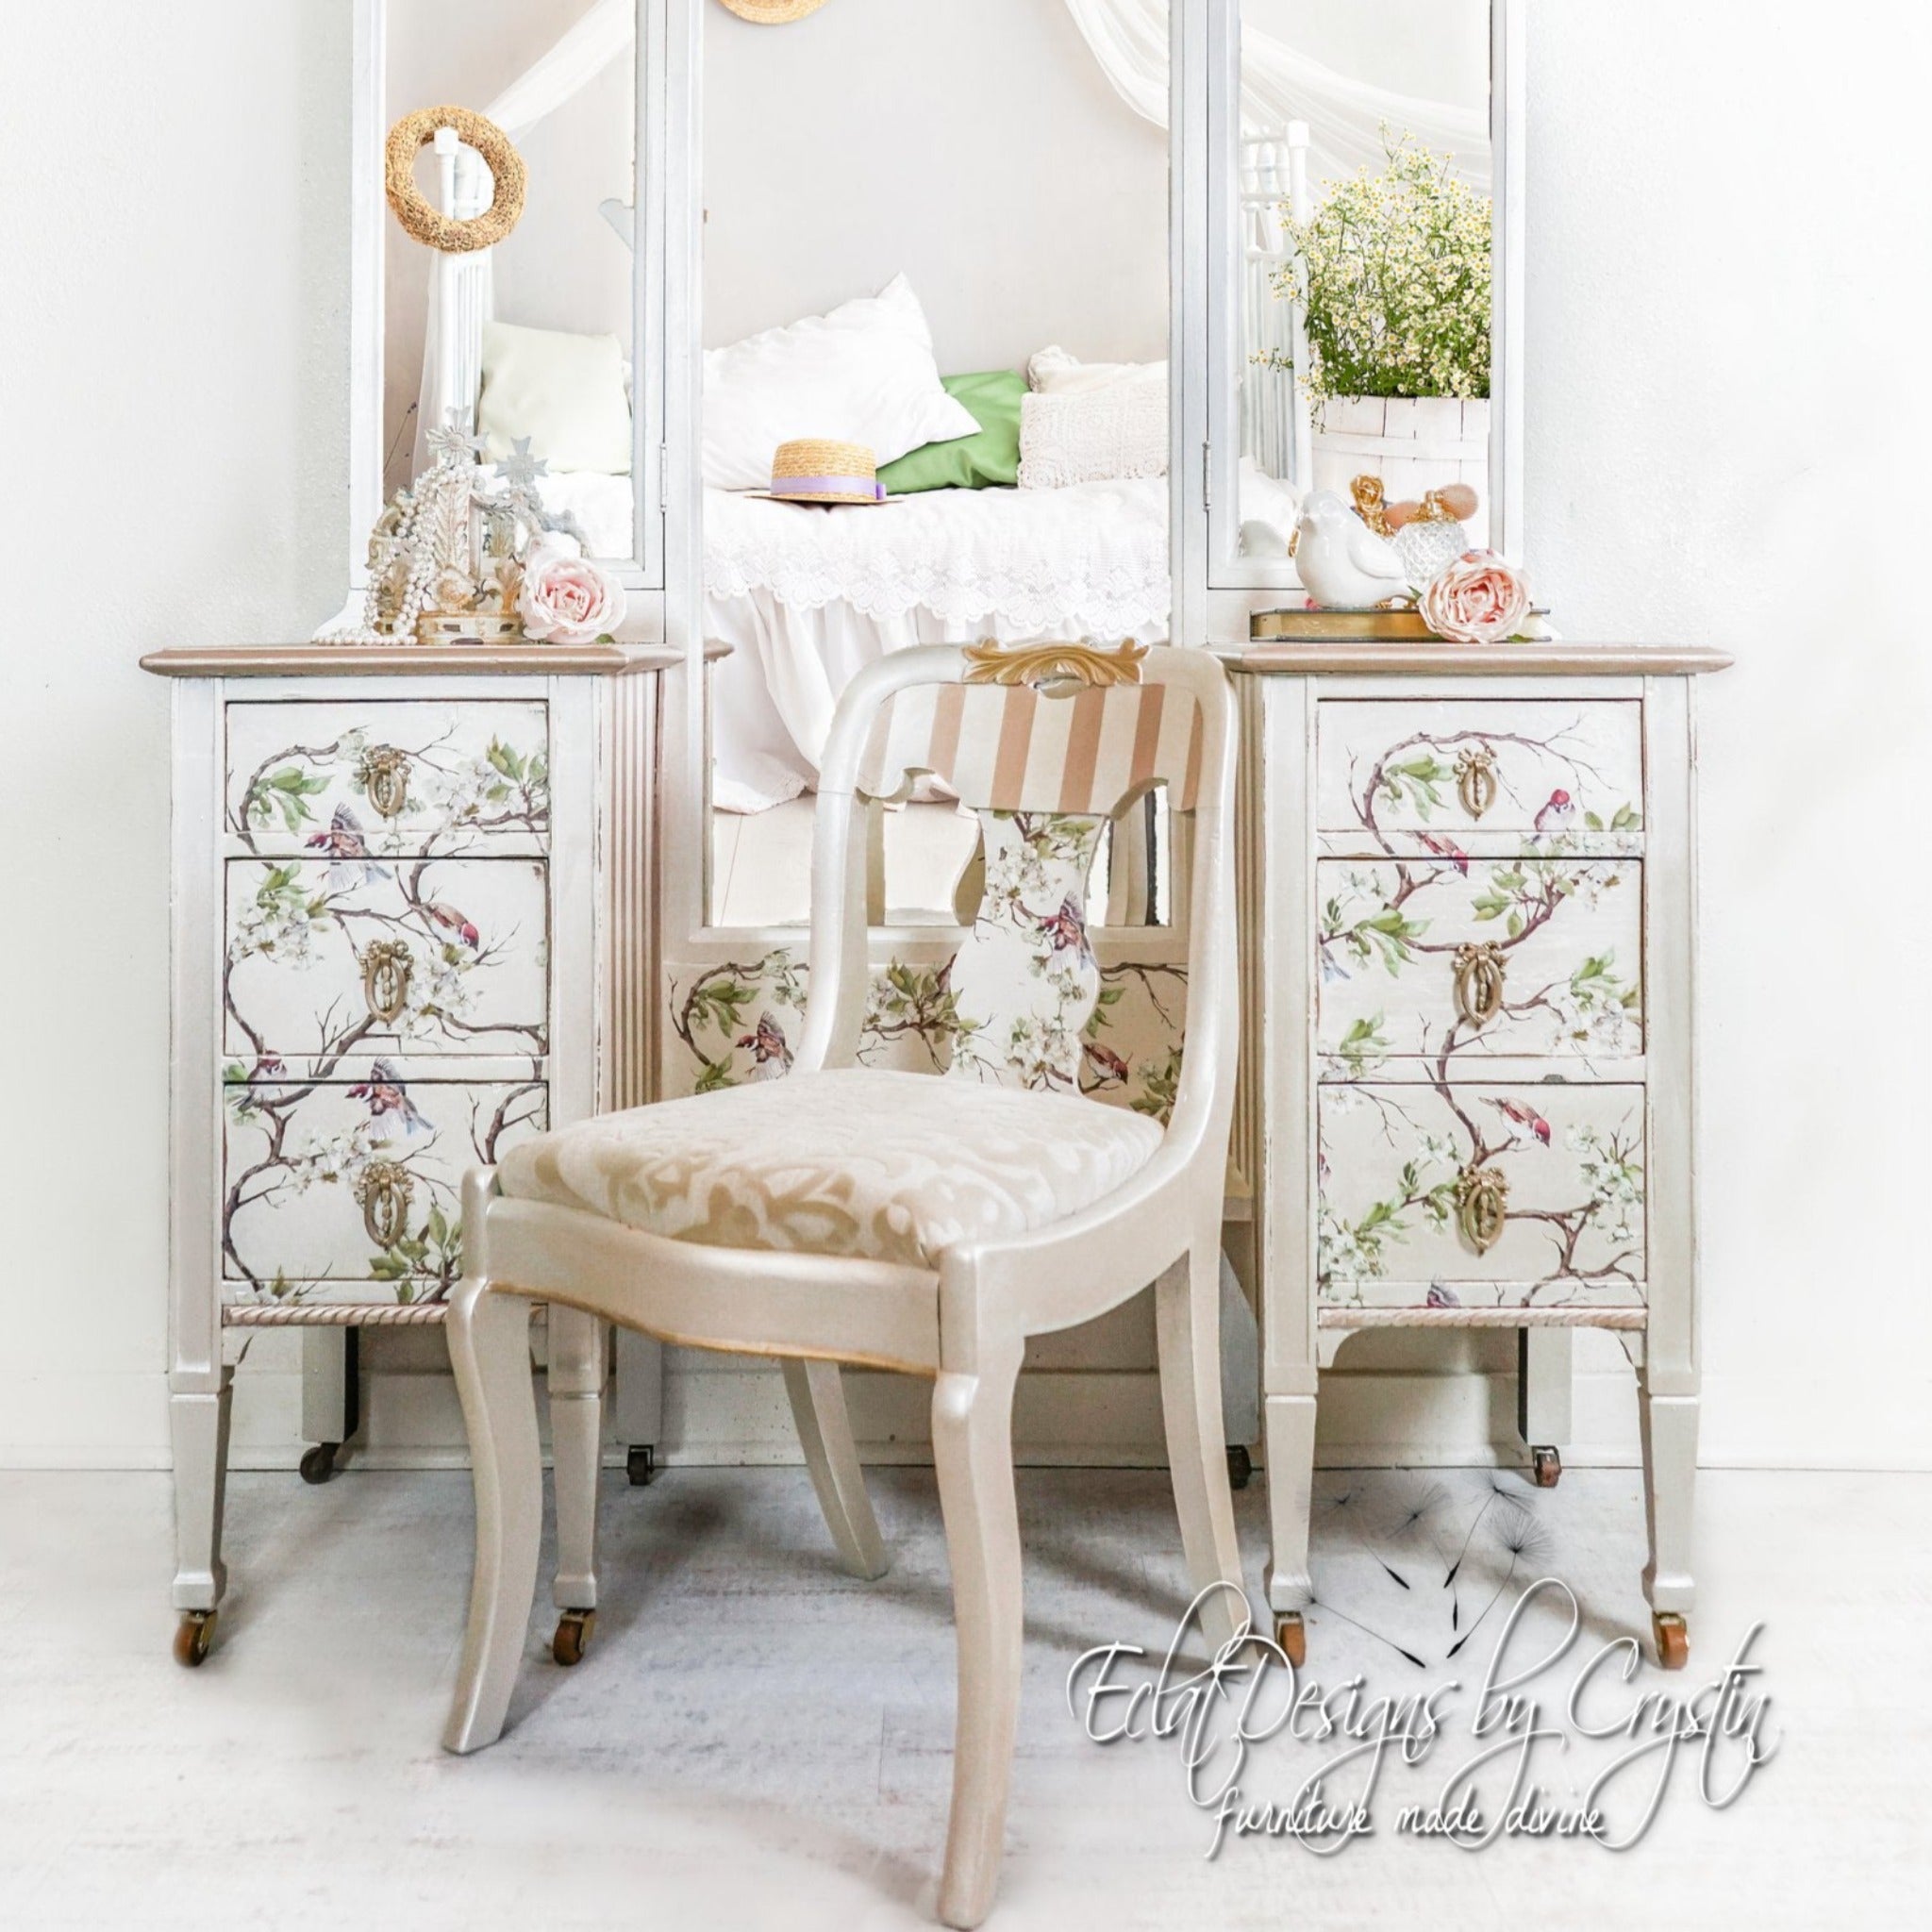 A vintage vanity desk refurbished by Eclat Designs by Crystin is painted white with champagne gold accents and features ReDesign with Prima's Blossom Flight transfer on it.